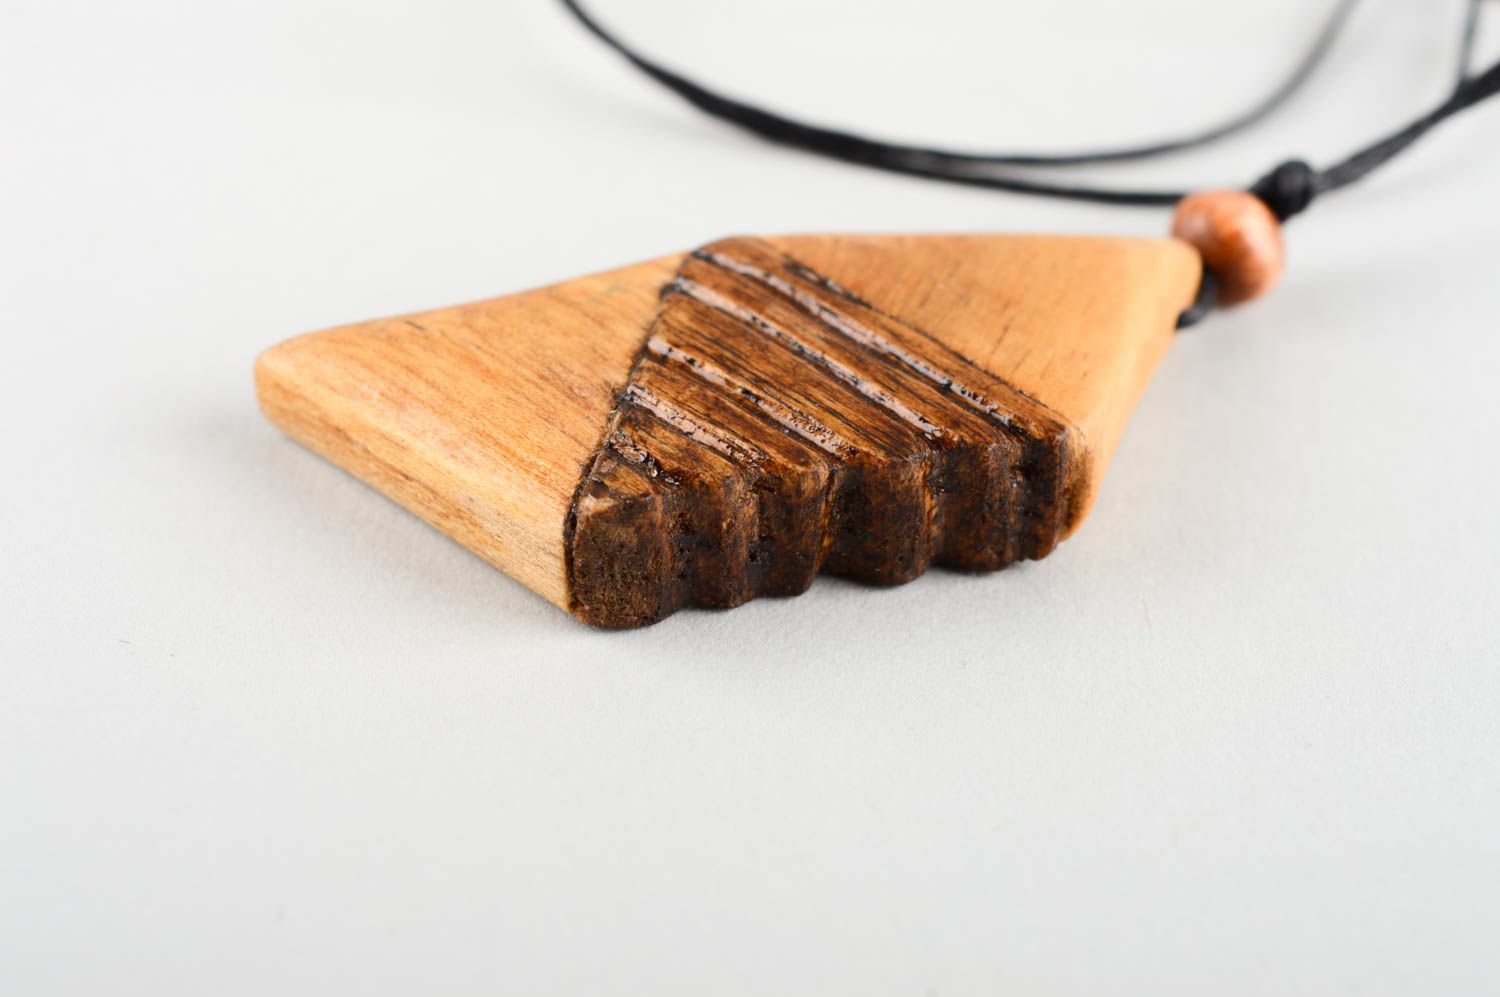 Stylish handmade wooden pendant artisan jewelry designs wood craft gifts for her photo 4